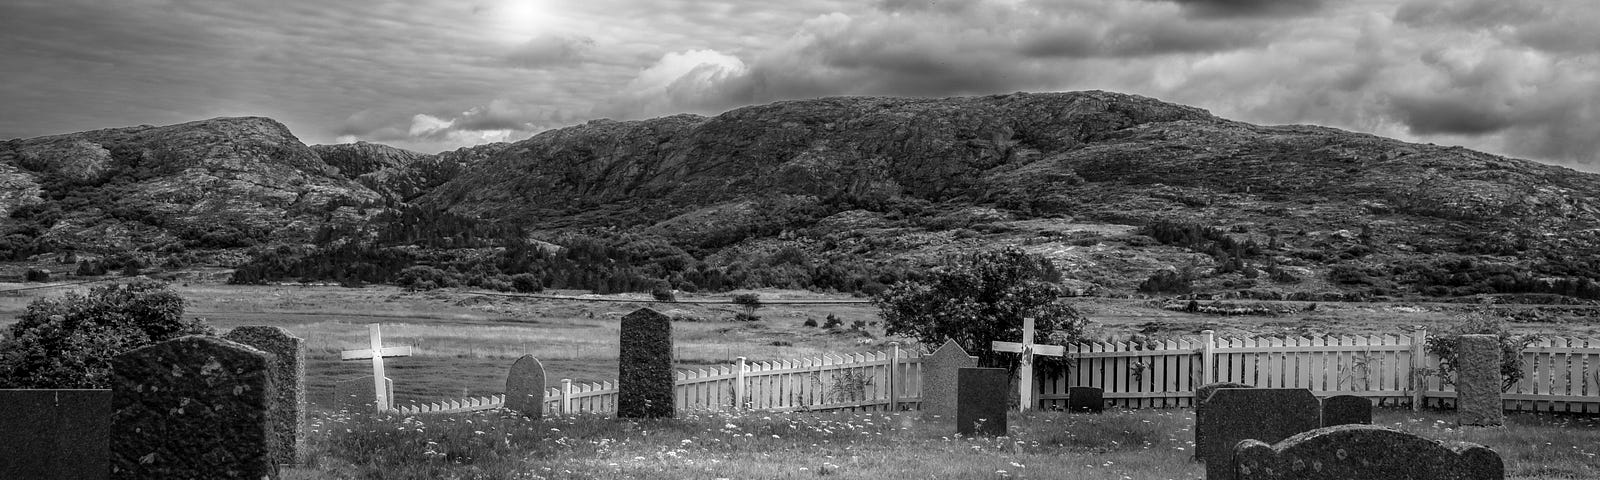 graveyard with tombstones and crosses, a white fence and hills in the background